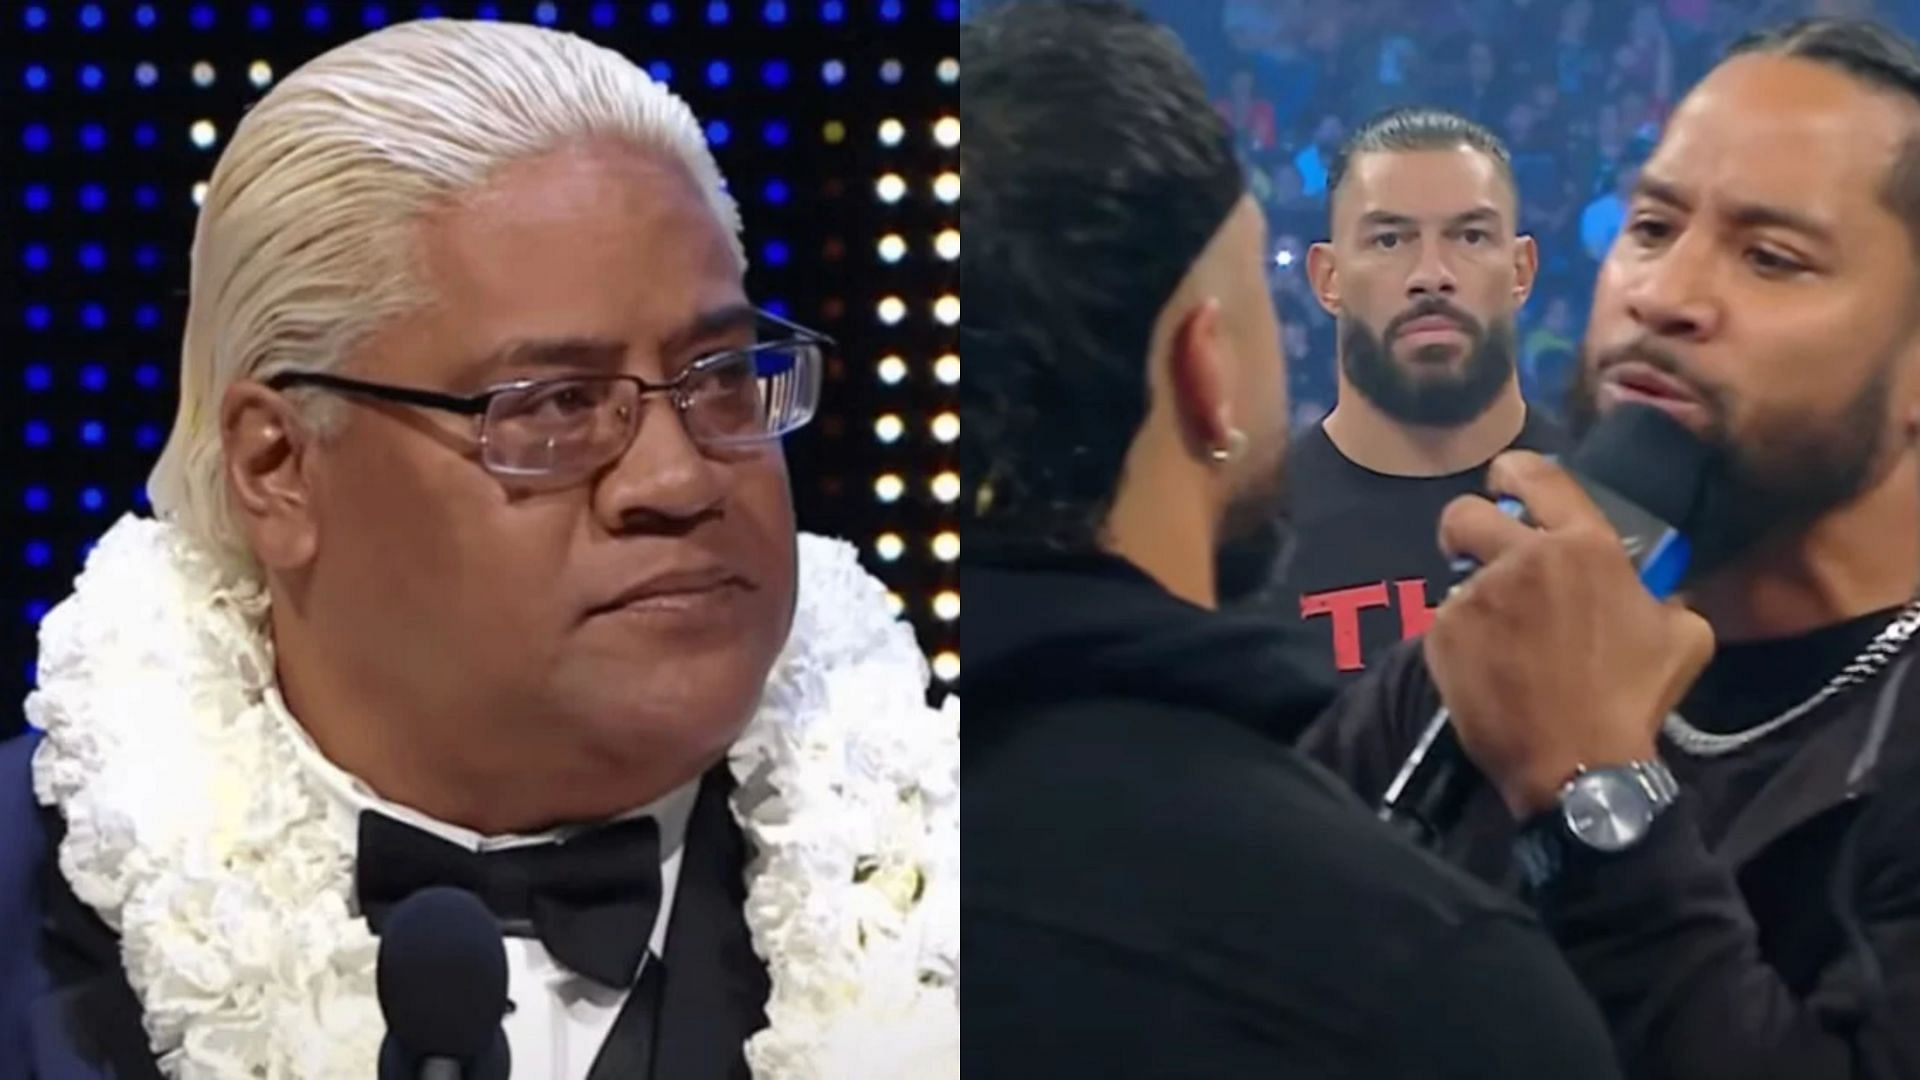 Will Rikishi return to WWE to get involved in the Bloodline storyline?